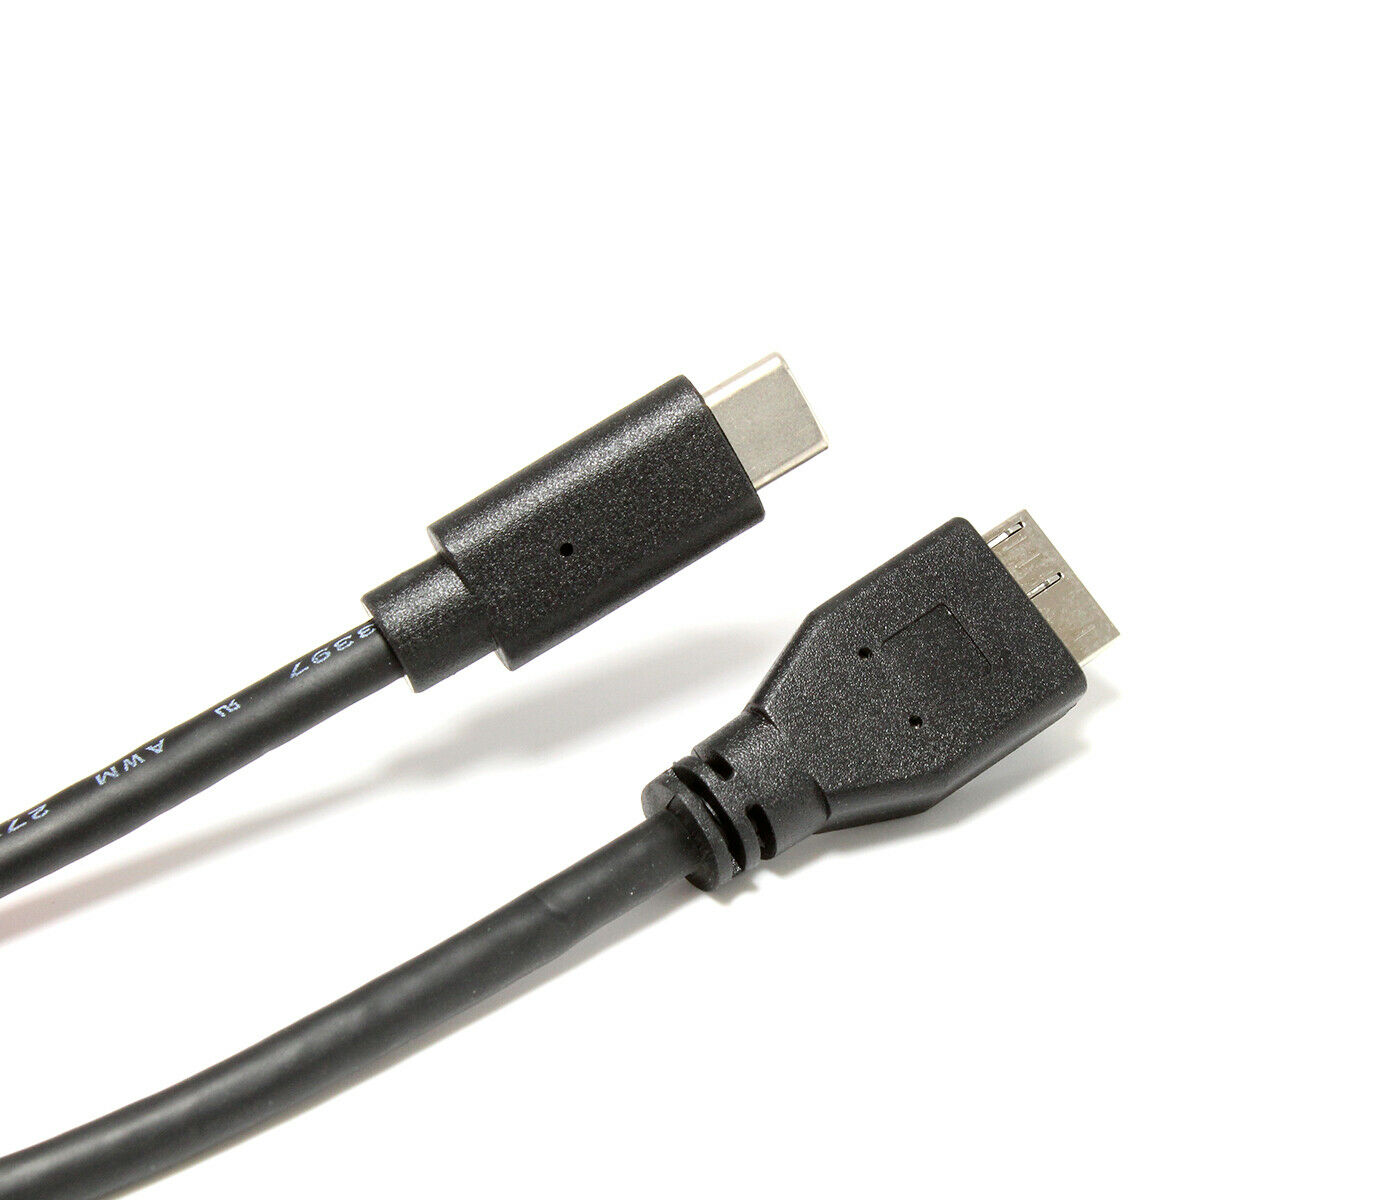 USB 3.1 Type C (USB-C) to USB 3.0 Micro-B Cable, 20-inch / 0.5M